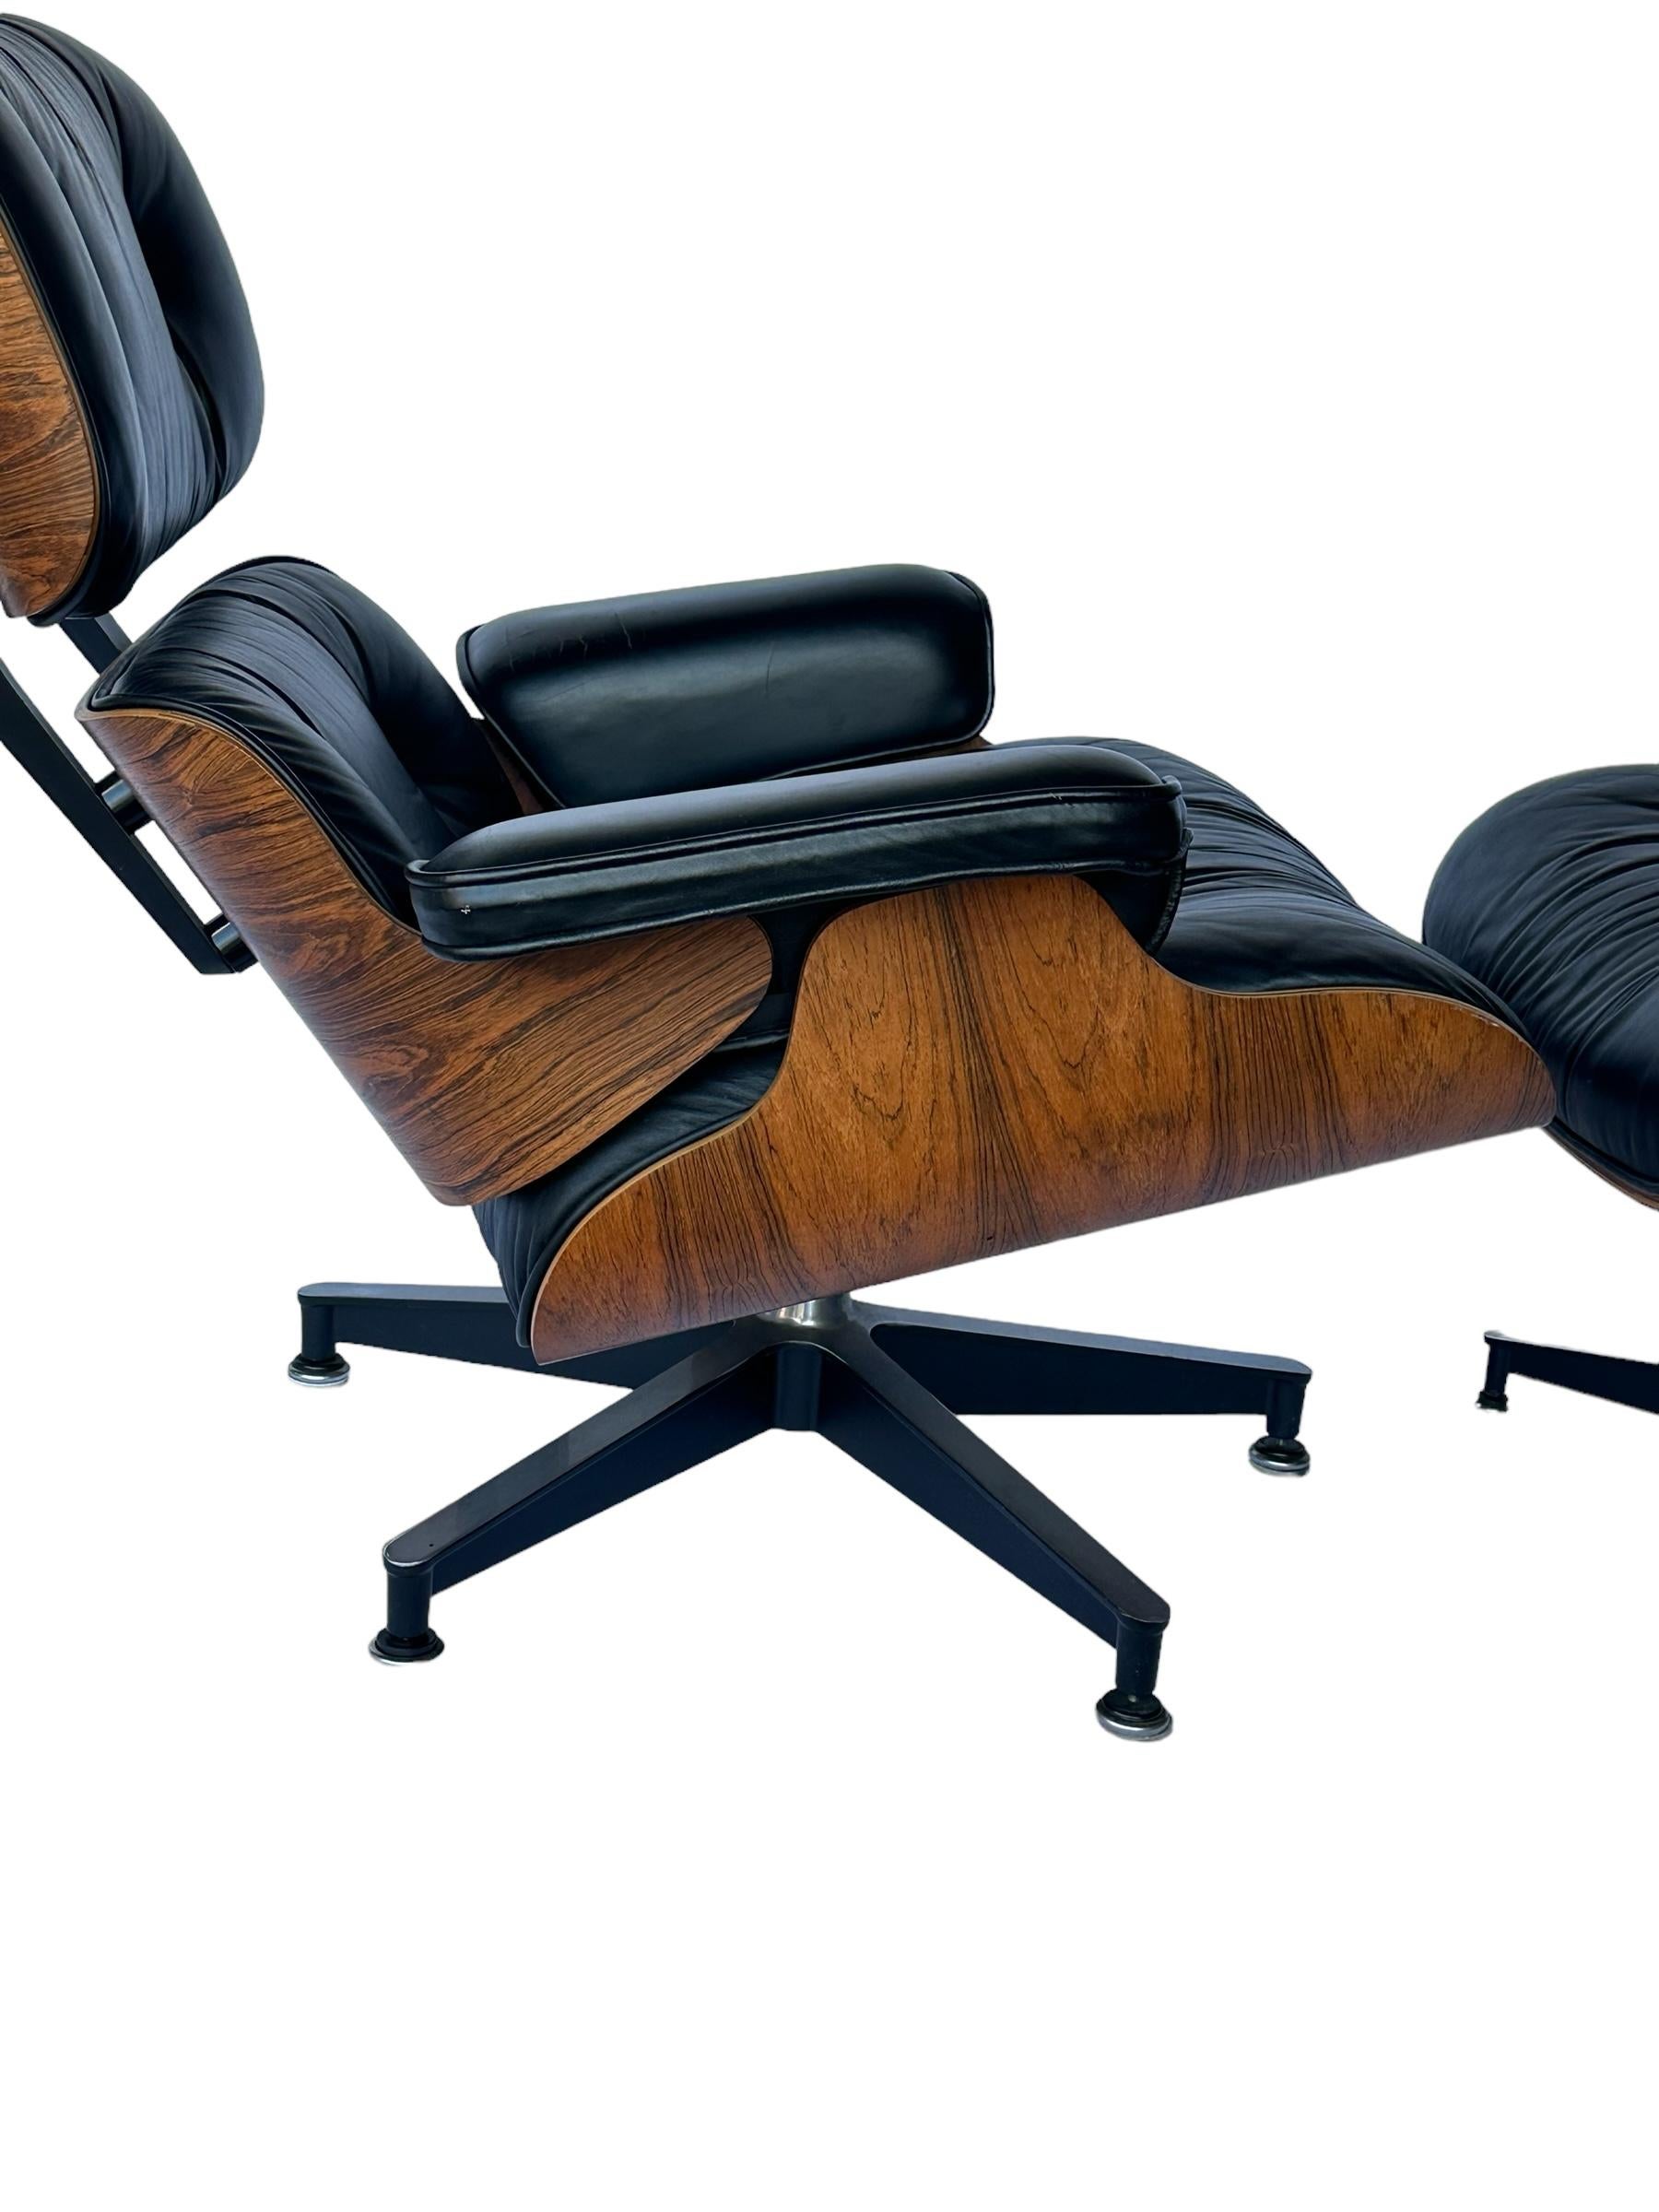 Restored 1970s Rosewood Eames Lounge Chair and Ottoman by Herman Miller In Good Condition For Sale In Brooklyn, NY